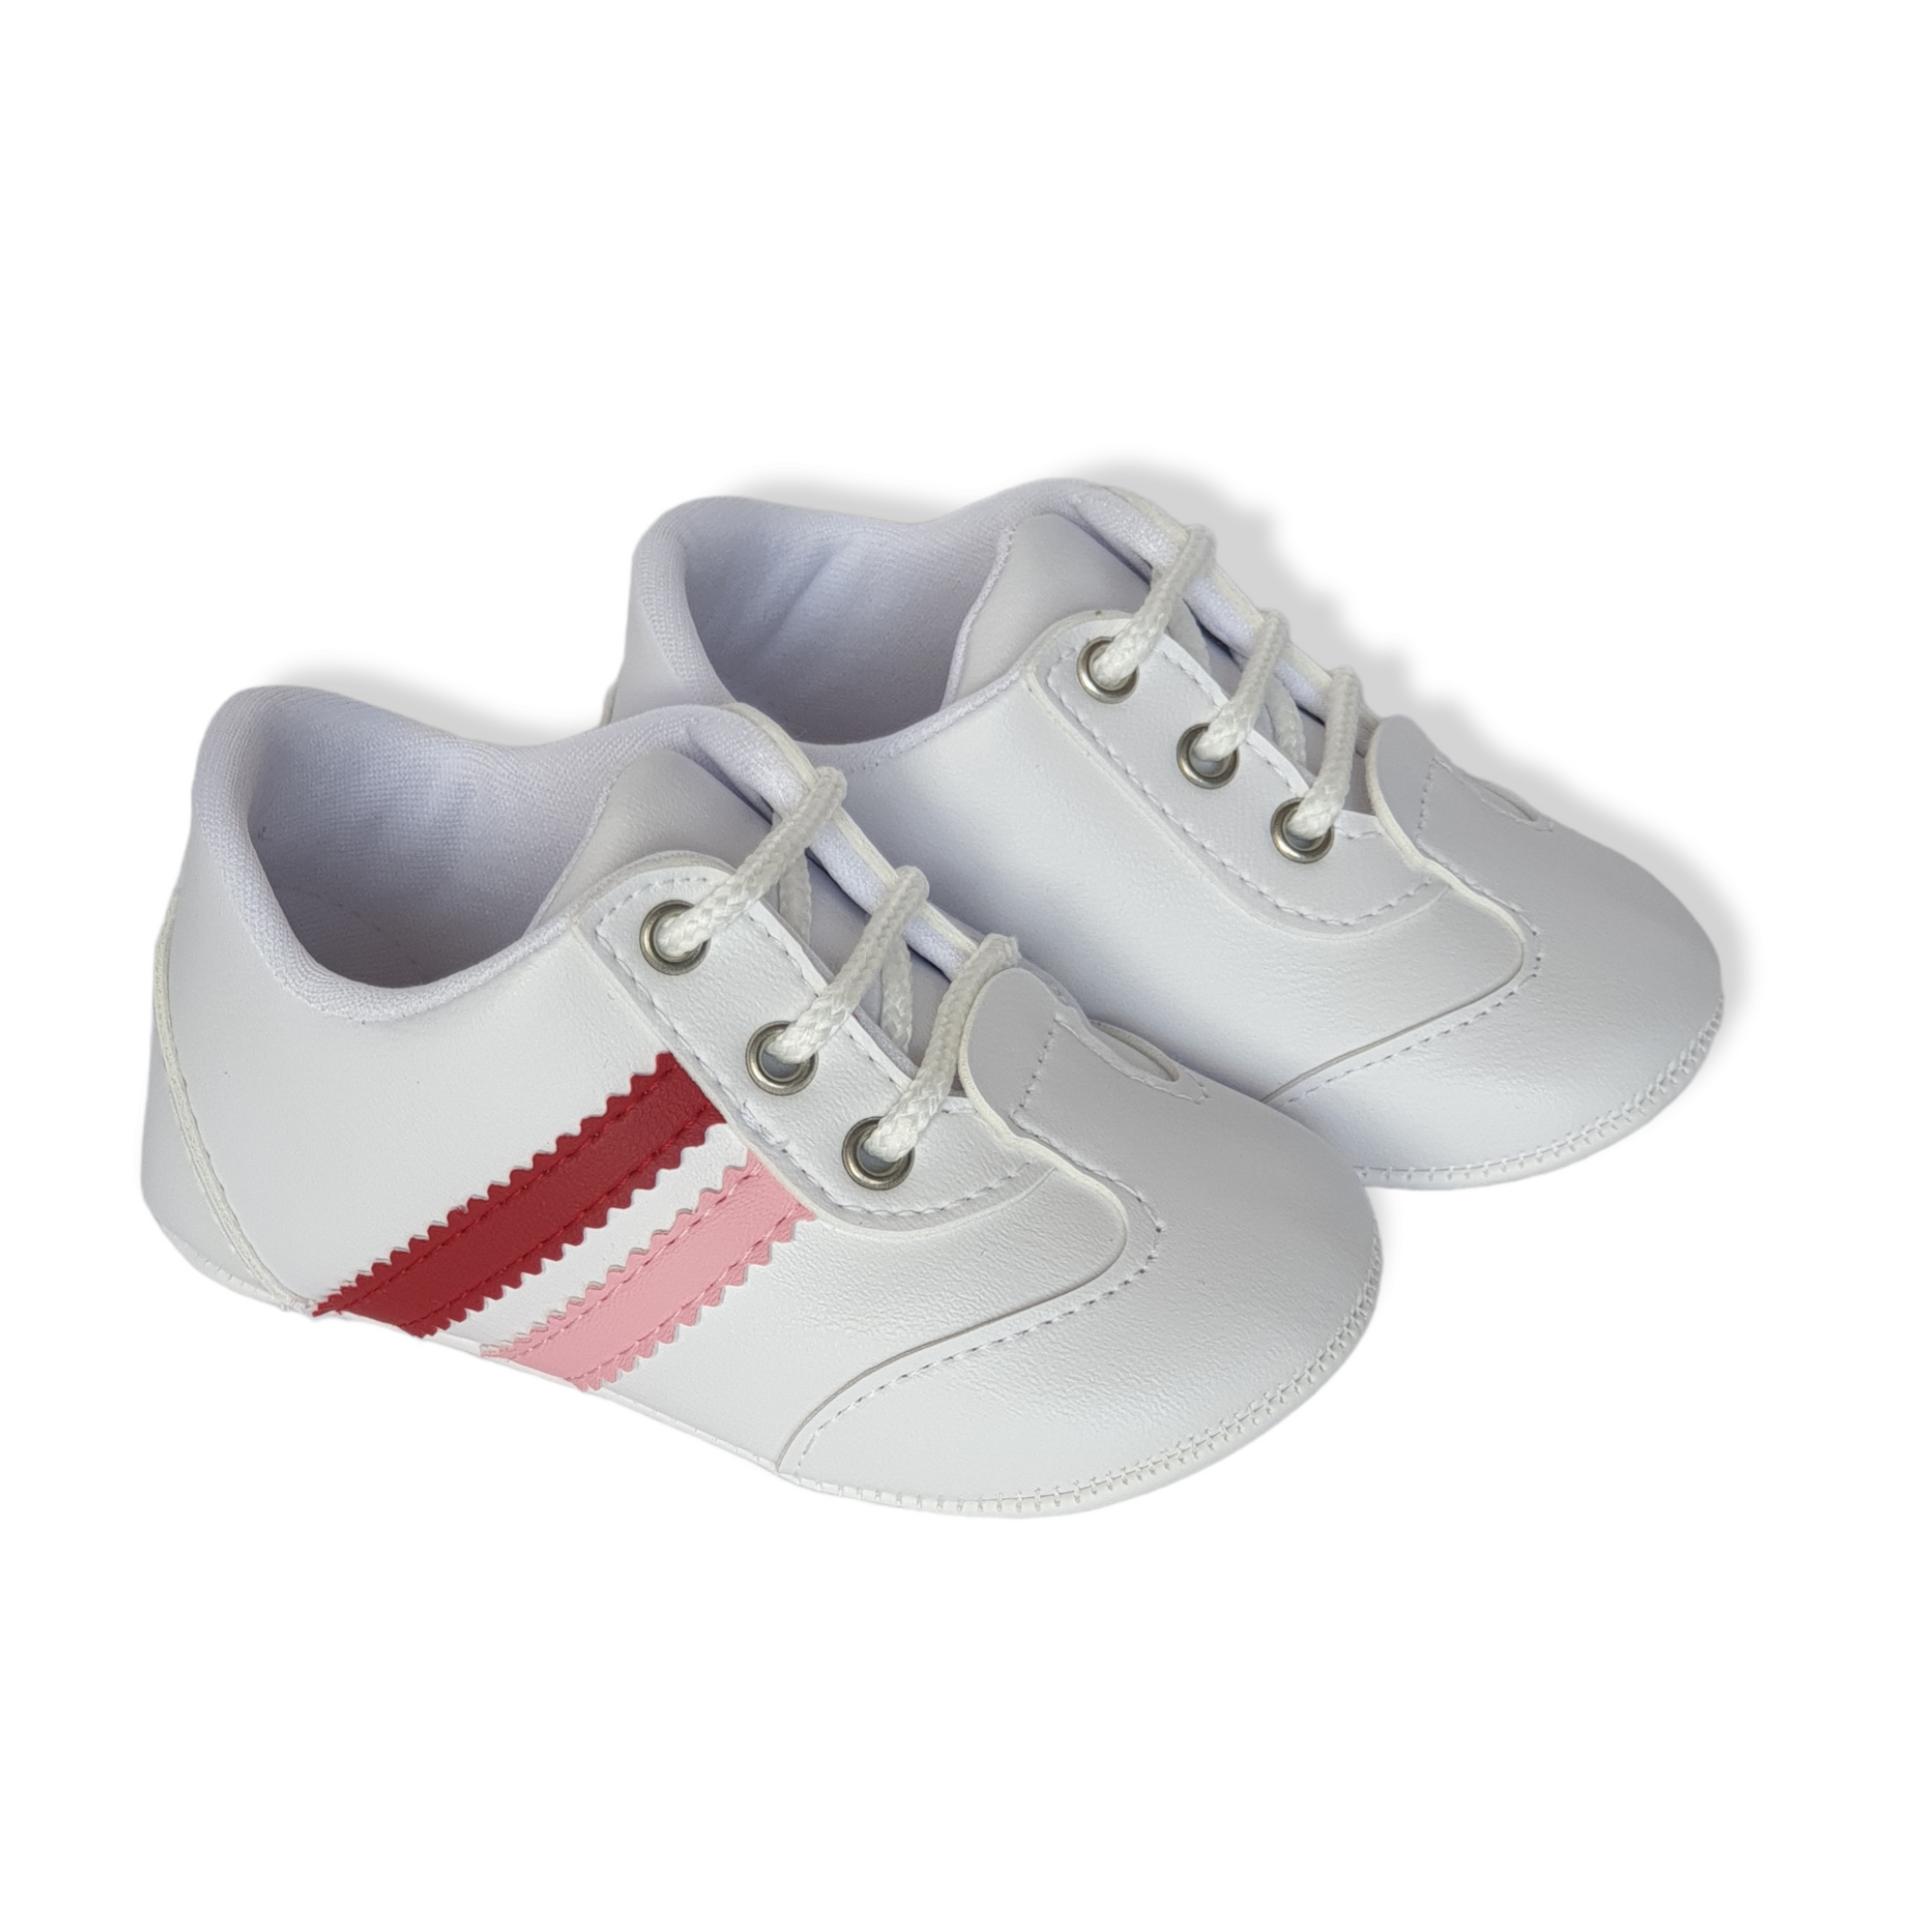 White With Pink and Red Stripes Sport Baby Shoes-Baby shoe, Boots, catgirl, catshoes, Pink, Red, Shoe, Shoes, Sneakers, Sport, White-Papulin-[Too Twee]-[Tootwee]-[baby]-[newborn]-[clothes]-[essentials]-[toys]-[Lebanon]